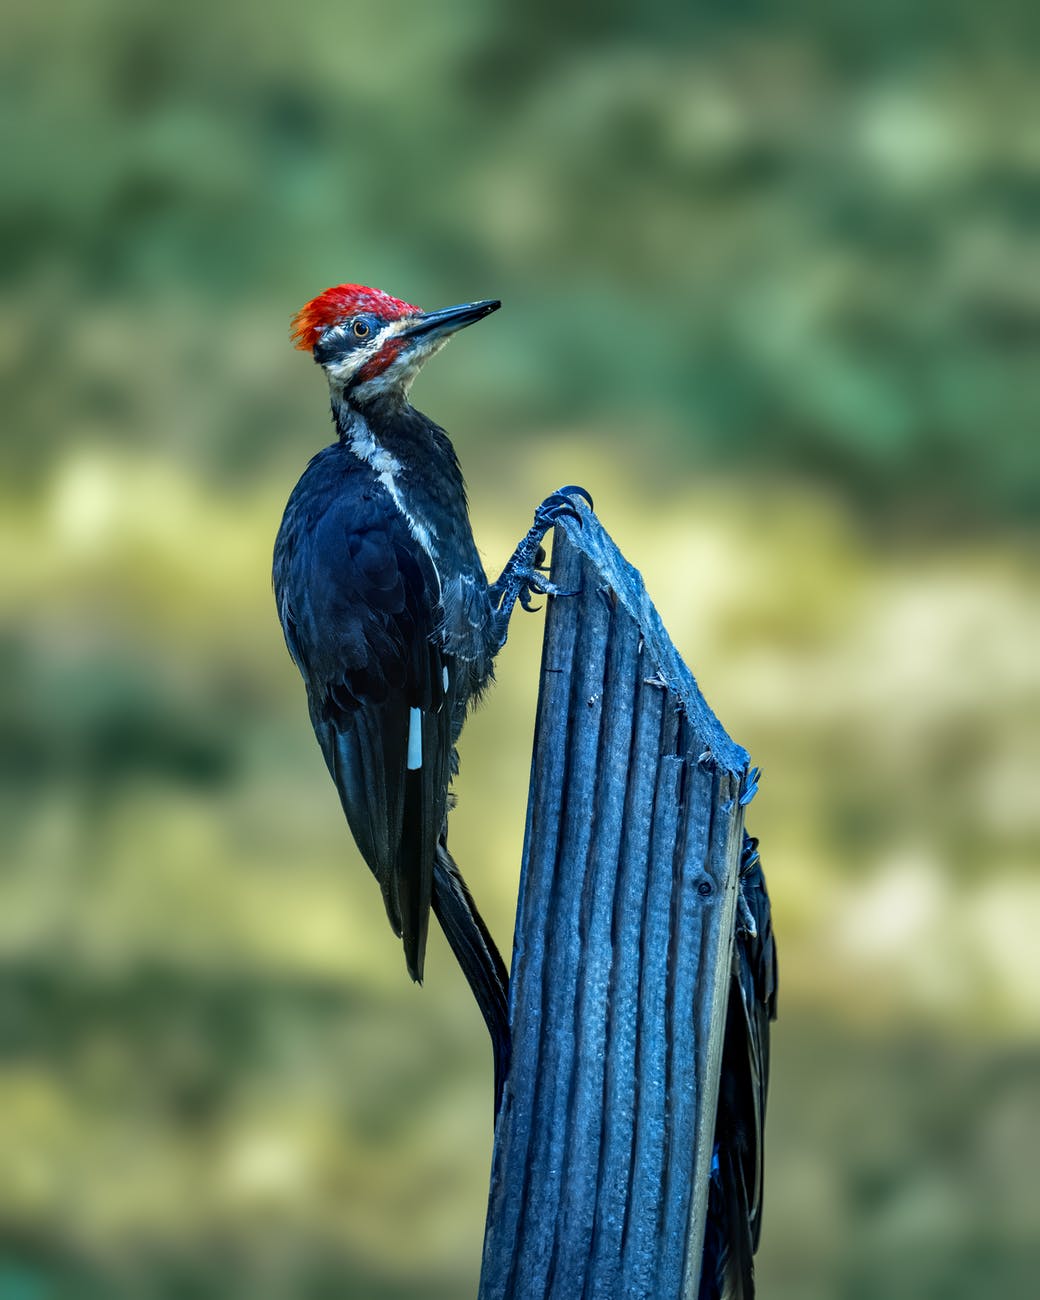 woodpecker sitting on surface in nature